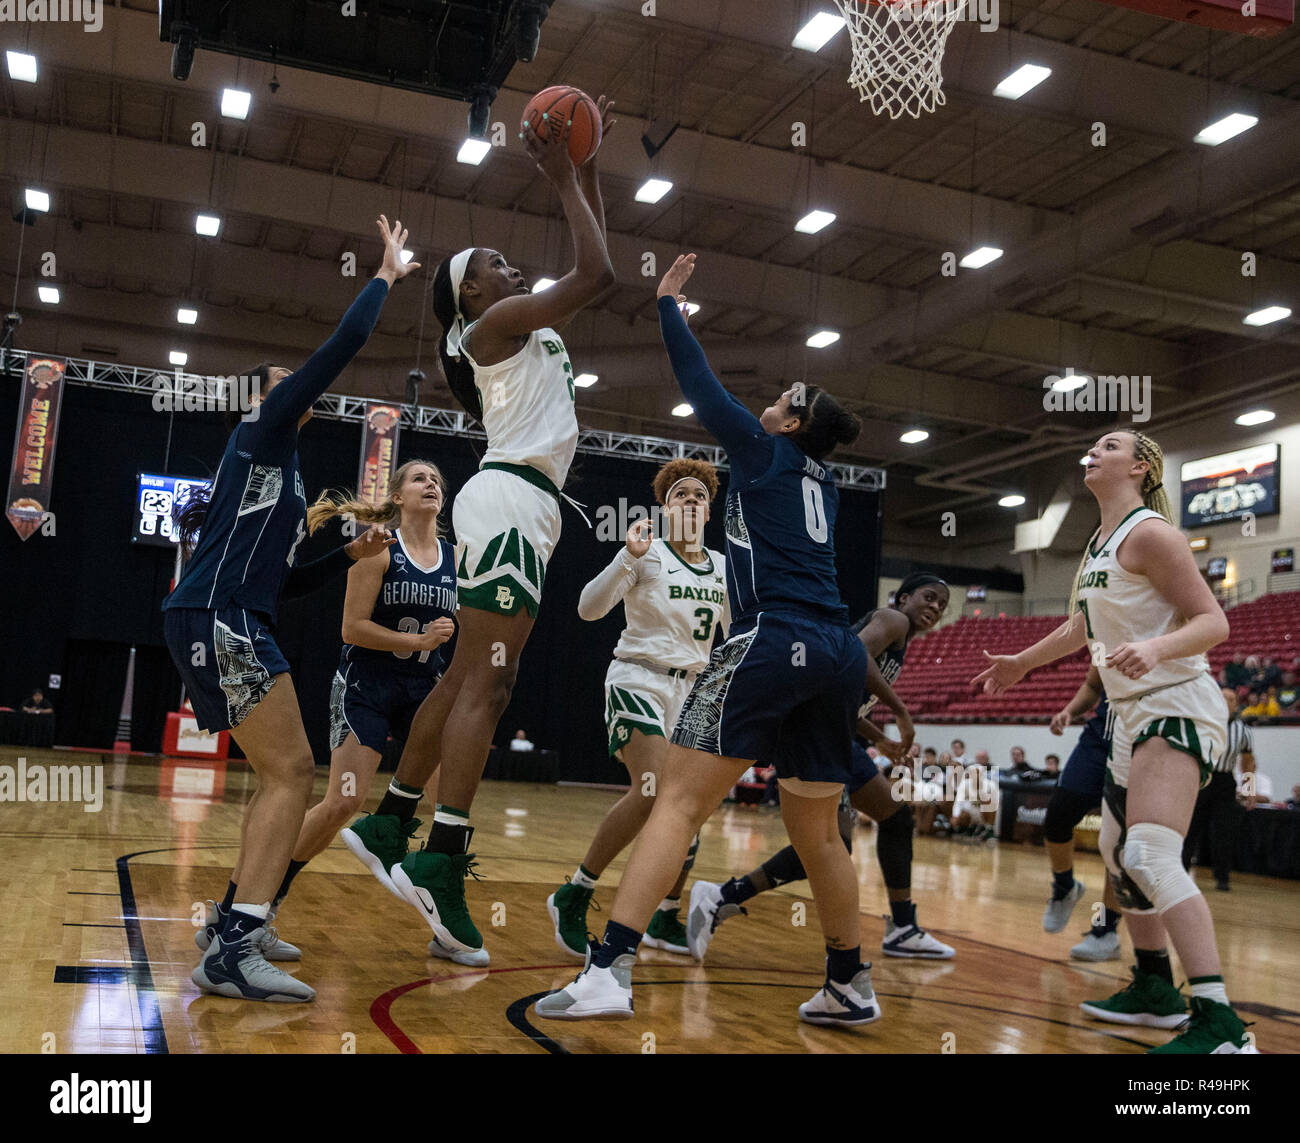 Nov 24 2018 Las Vegas, NV U.S.A. Baylor center Queen Egbo (25) take a shot during the NCAA Women's Basketball Thanksgiving Shootout between Baylor Bears and the Georgetown Hoyas 67-46 win at South Point Arena Las Vegas, NV. Thurman James/CSM Stock Photo